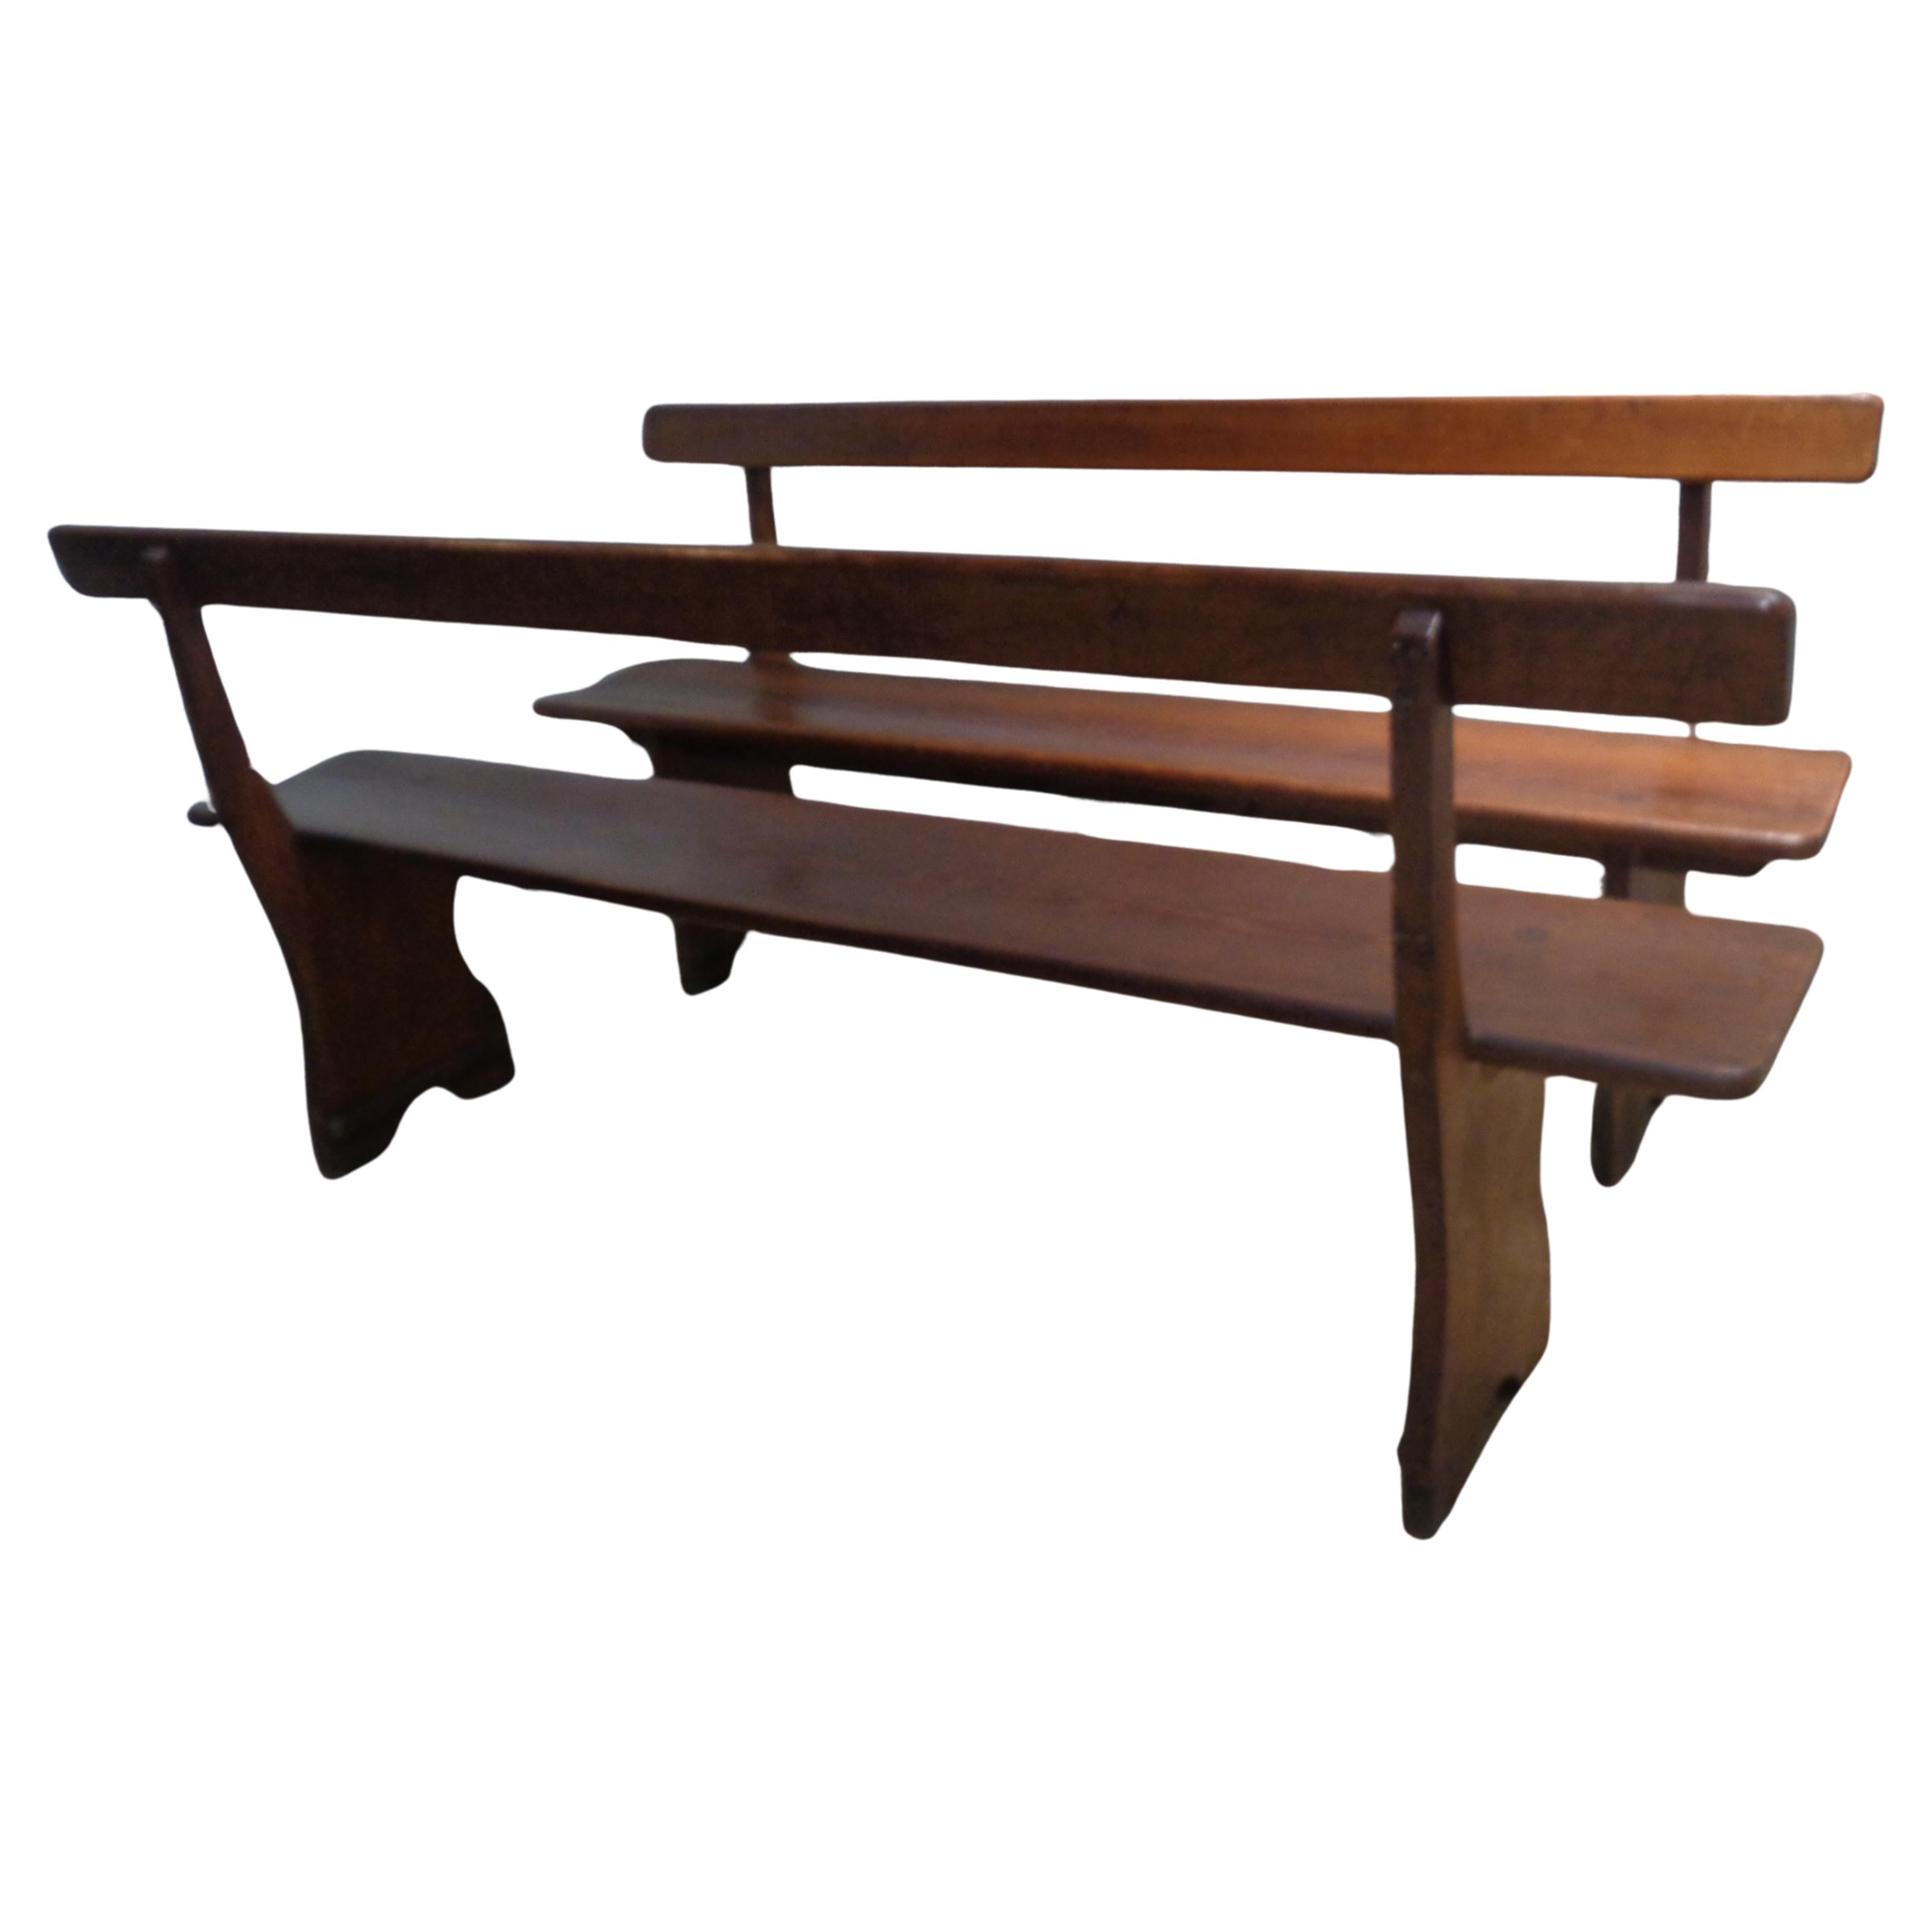  Exceptional Antique American Country Benches For Sale 6